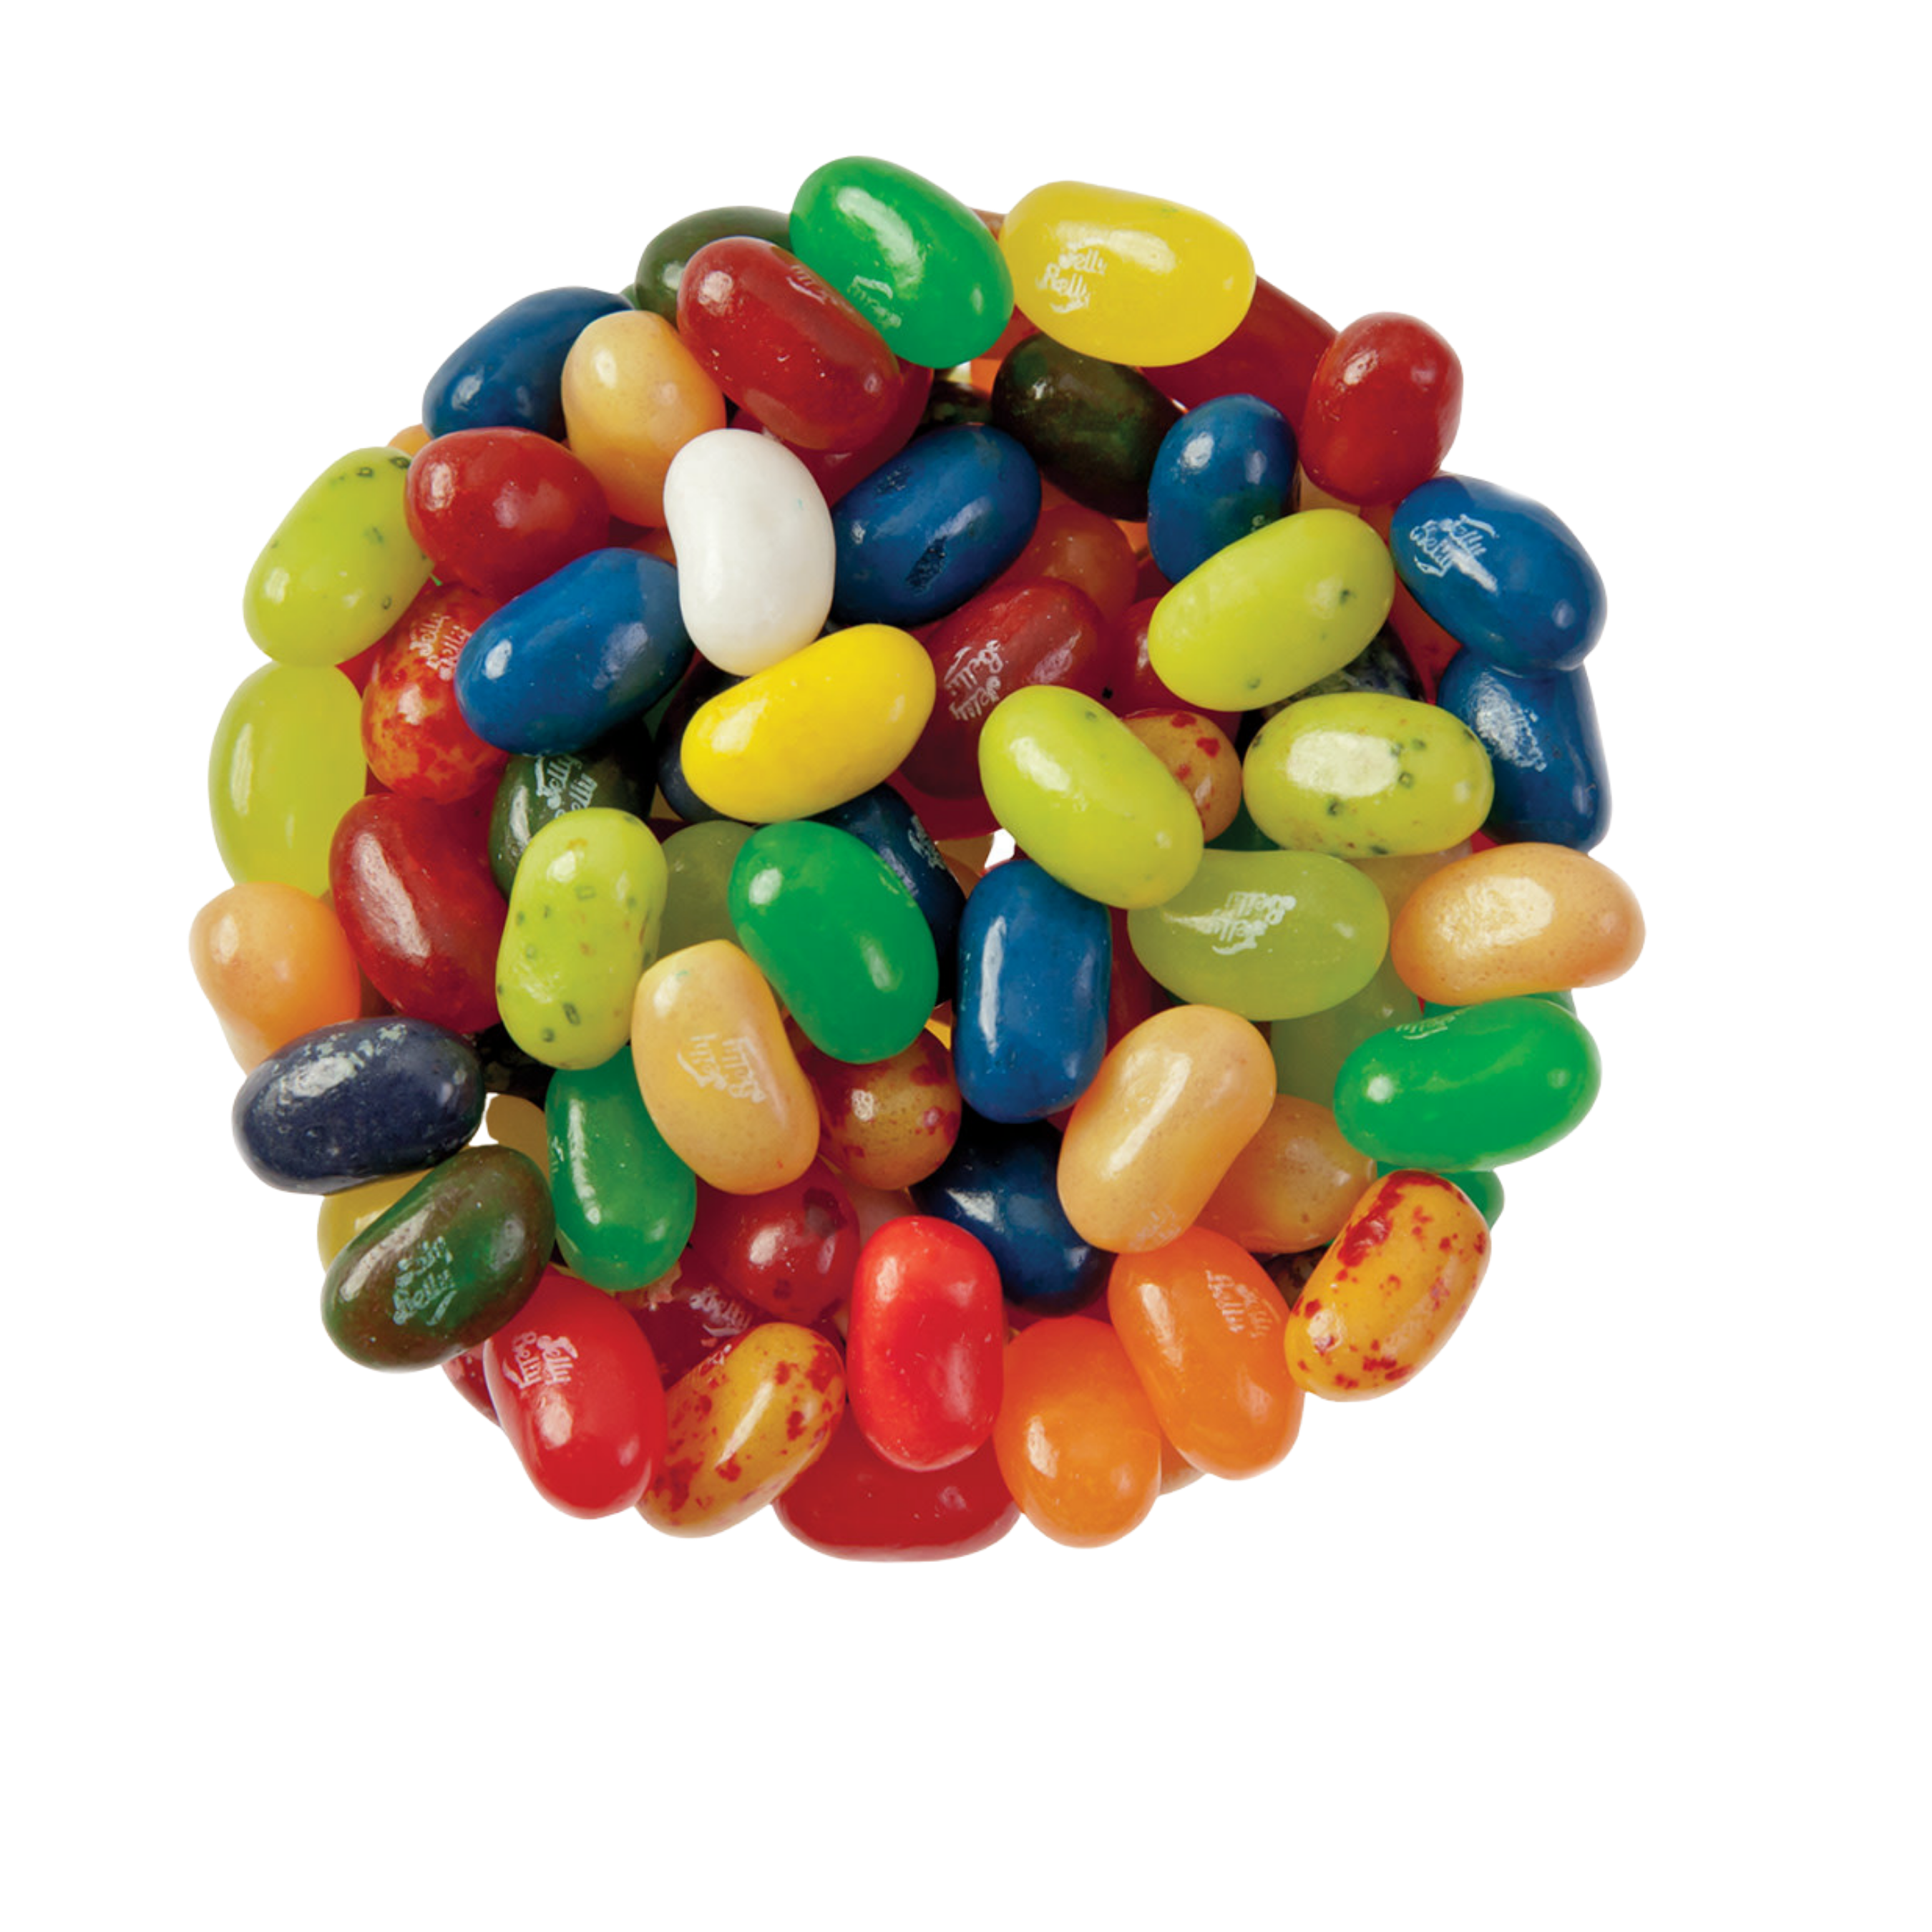 Fruit Bowl Jelly Belly